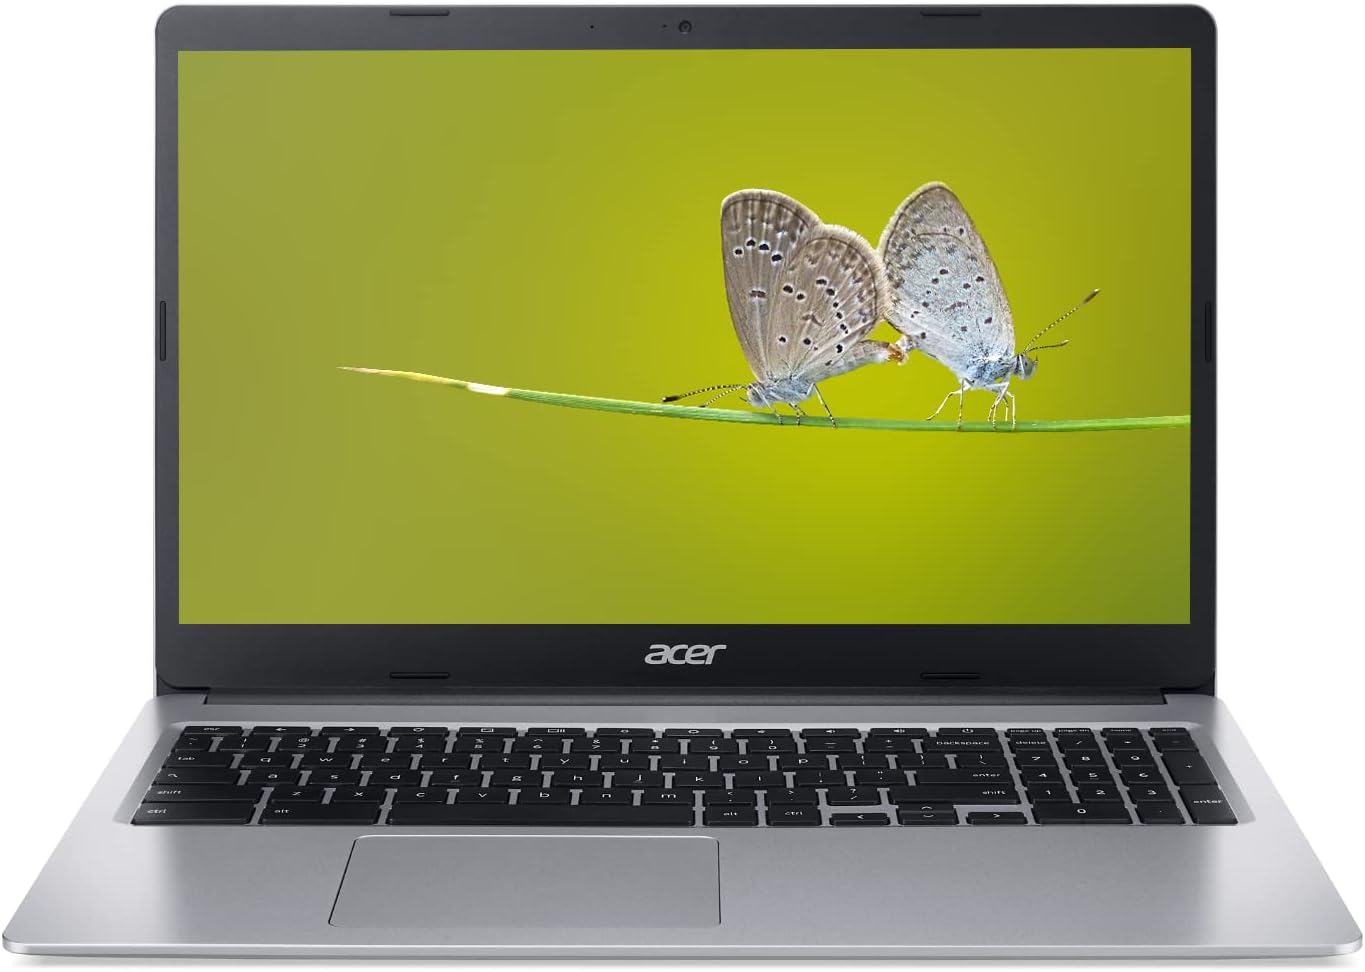 Which Laptop Model Works for You? ASUS, Acer, Chicbuy, HP